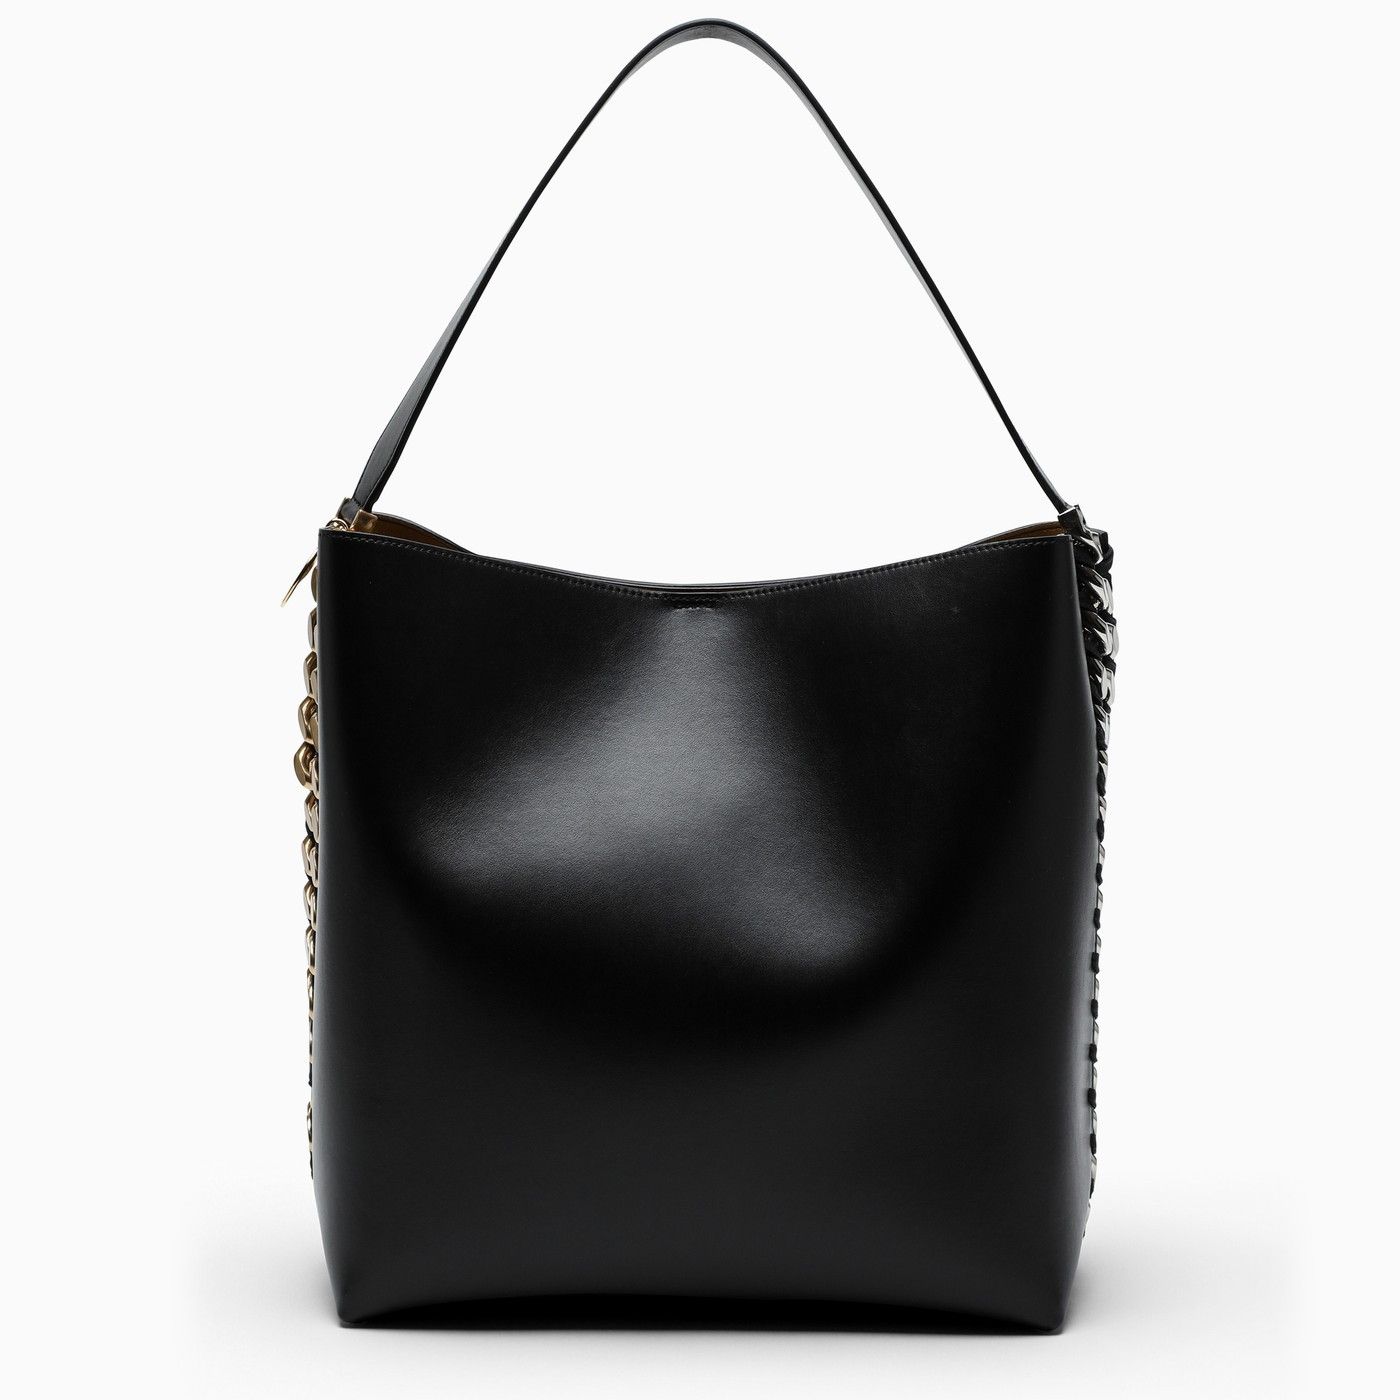 Stella McCartney o1d2blof0623 Tote Bag in Black Size ONE SIZE - 1 Preview